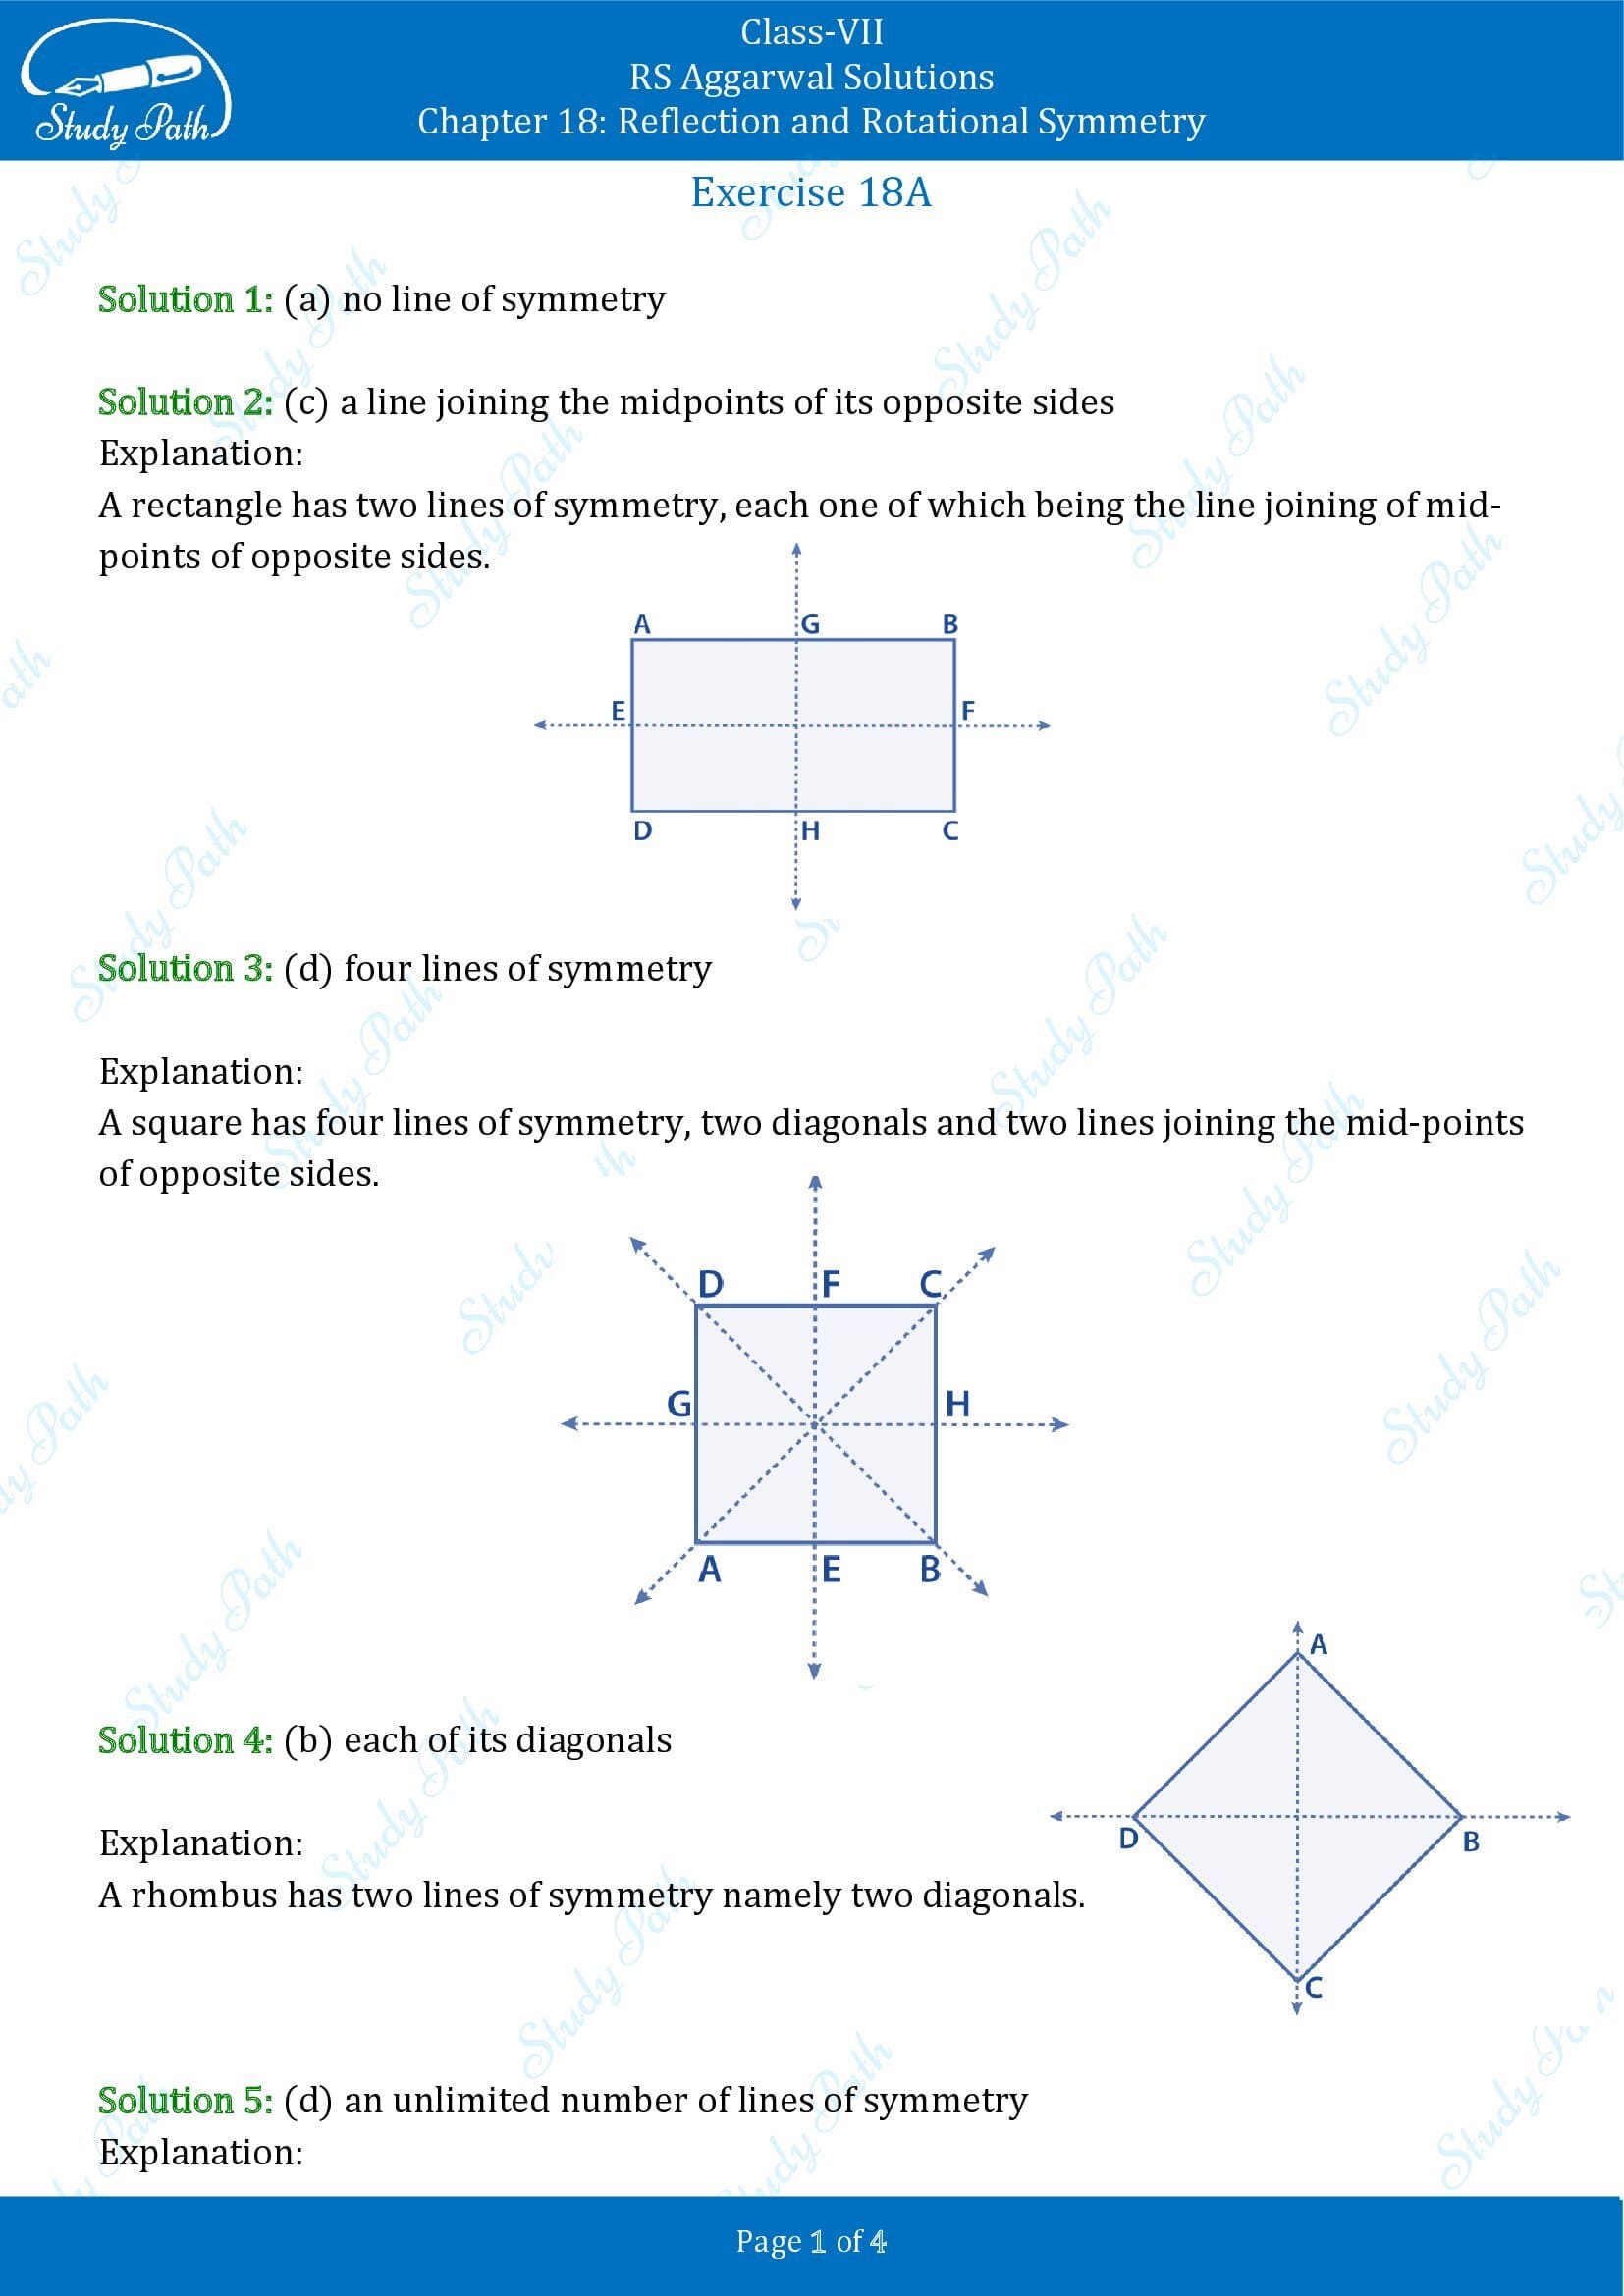 RS Aggarwal Solutions Class 7 Chapter 18 Reflection and Rotational Symmetry Exercise 18A 0001